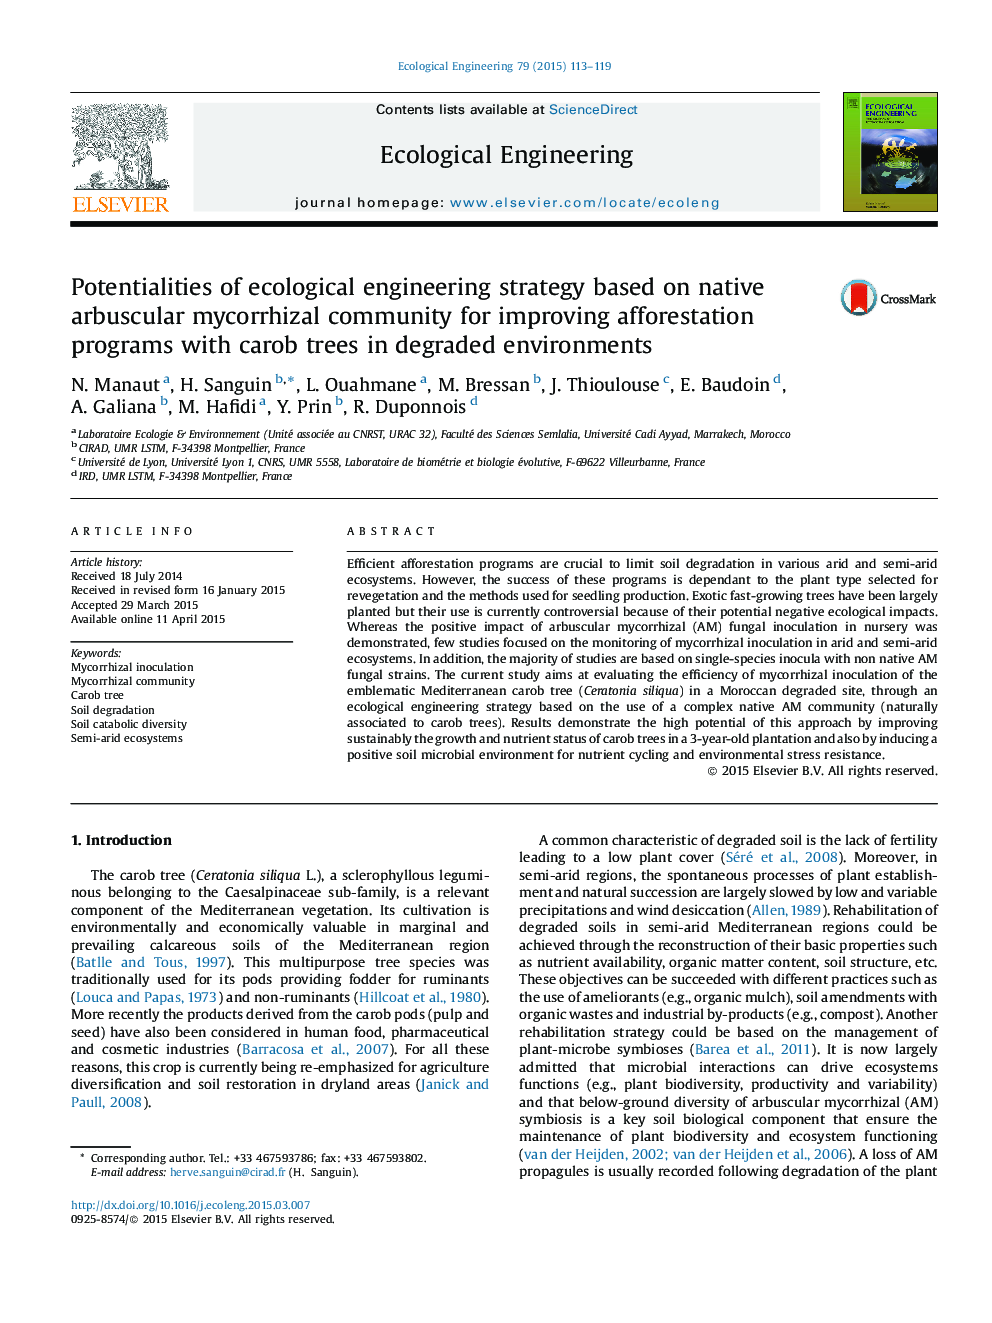 Potentialities of ecological engineering strategy based on native arbuscular mycorrhizal community for improving afforestation programs with carob trees in degraded environments